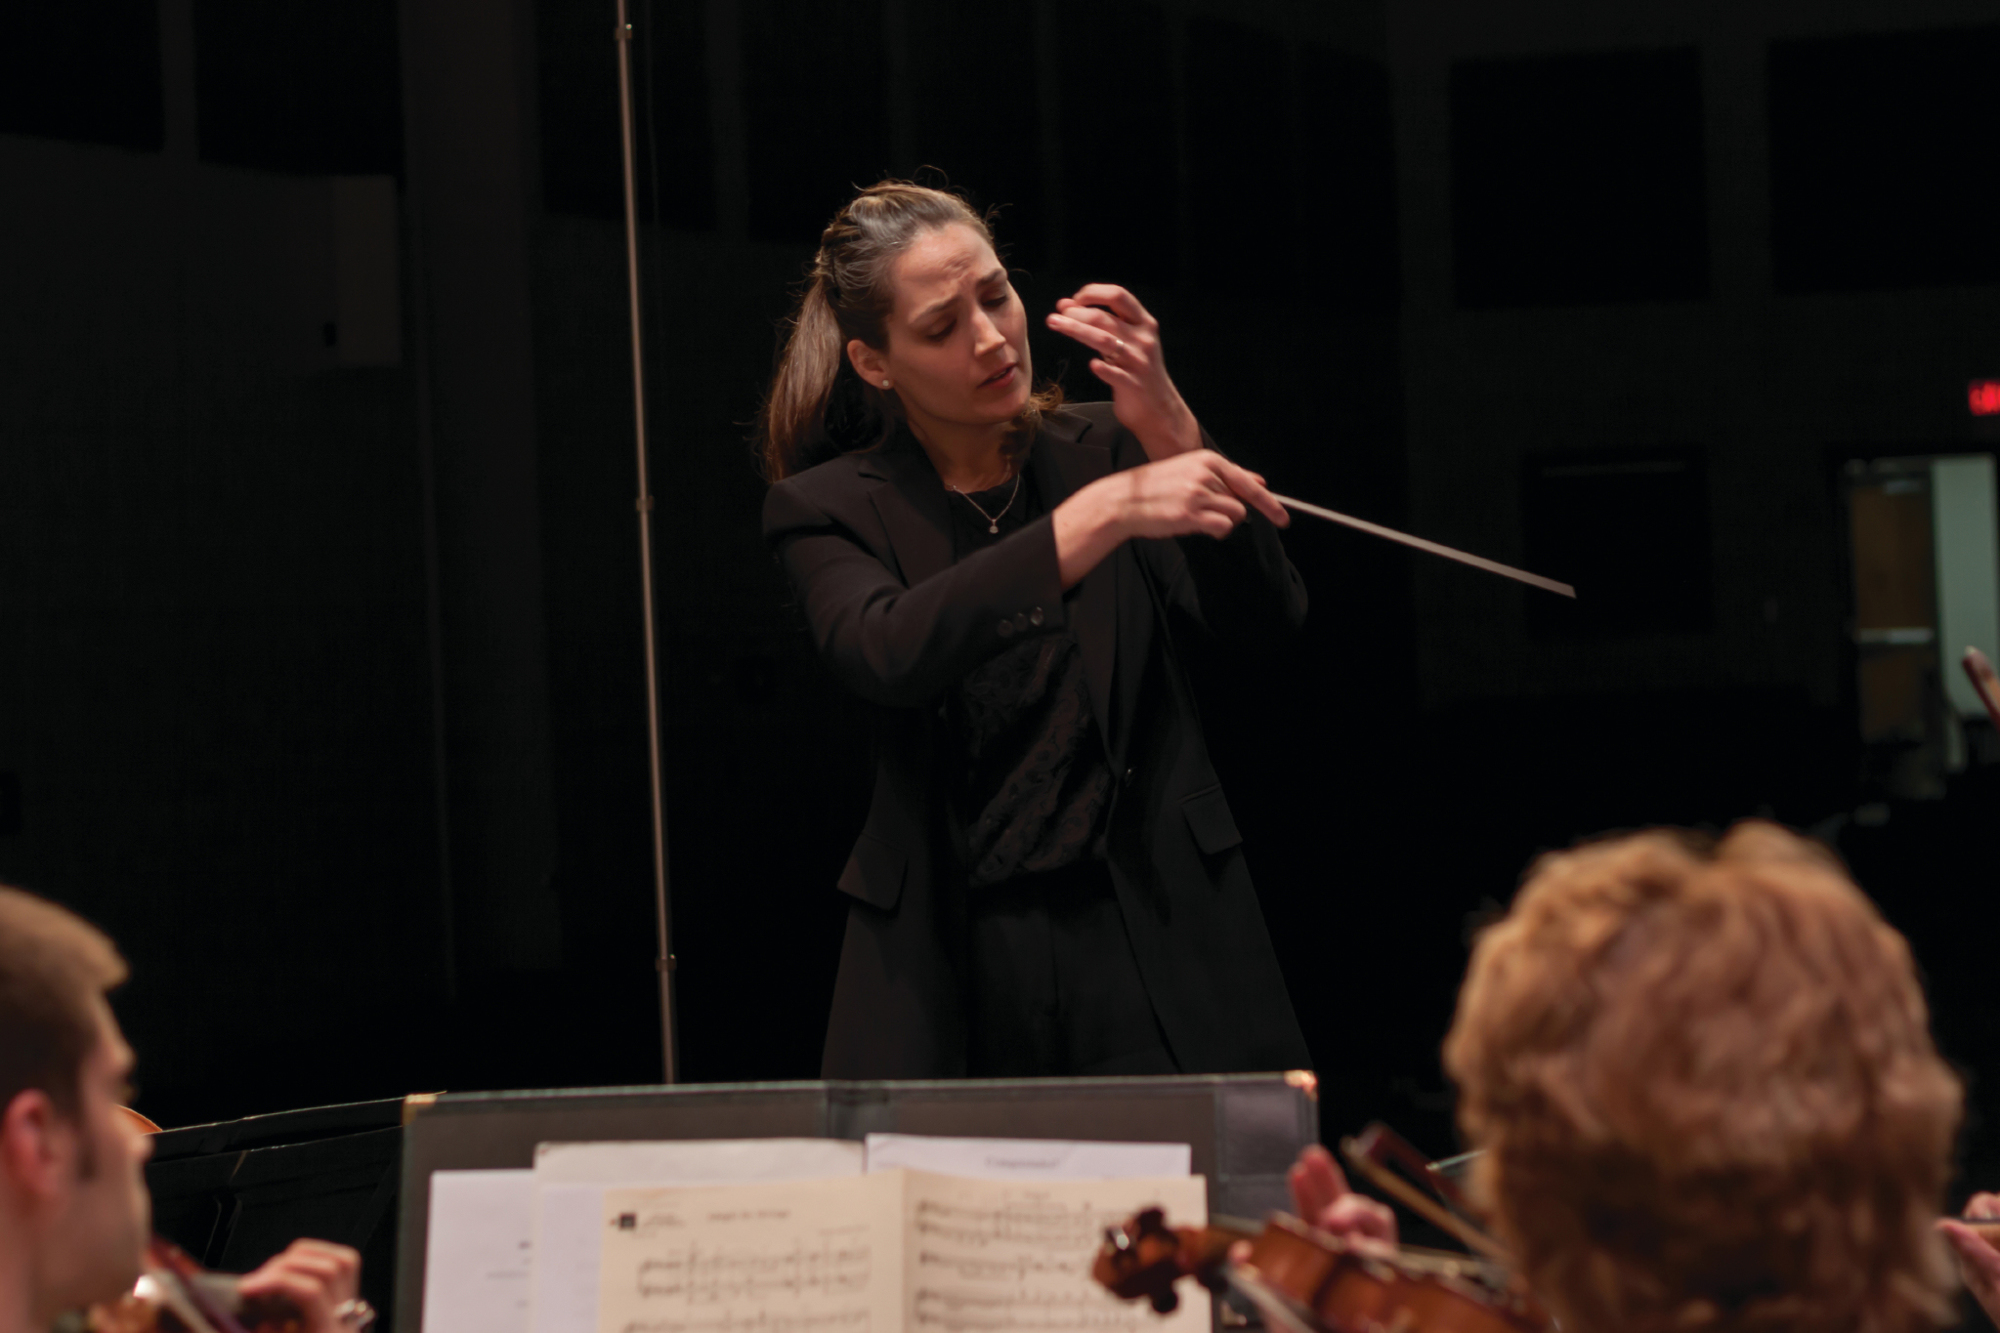 Guest conductor Michelle Merrill will guide the Sarasota Symphony through a collection of holiday favorites in its 